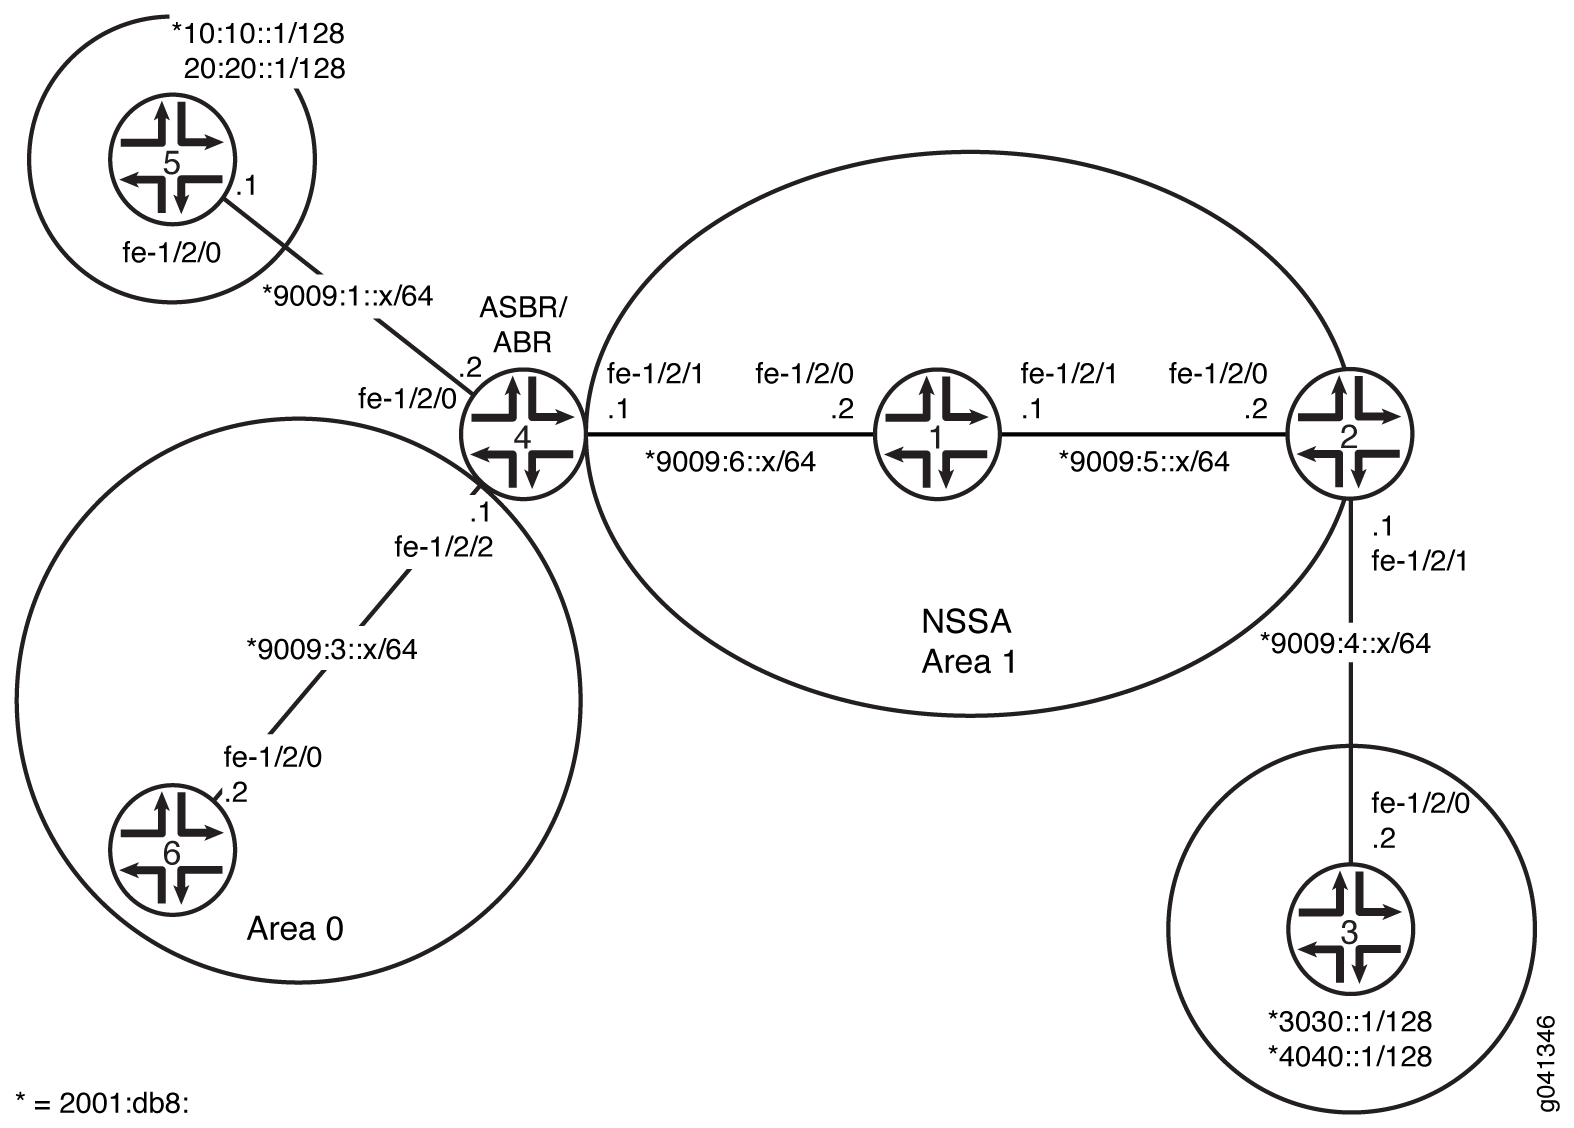 OSPFv3 Network Topology with an NSSA ABR That Is Also an ASBR